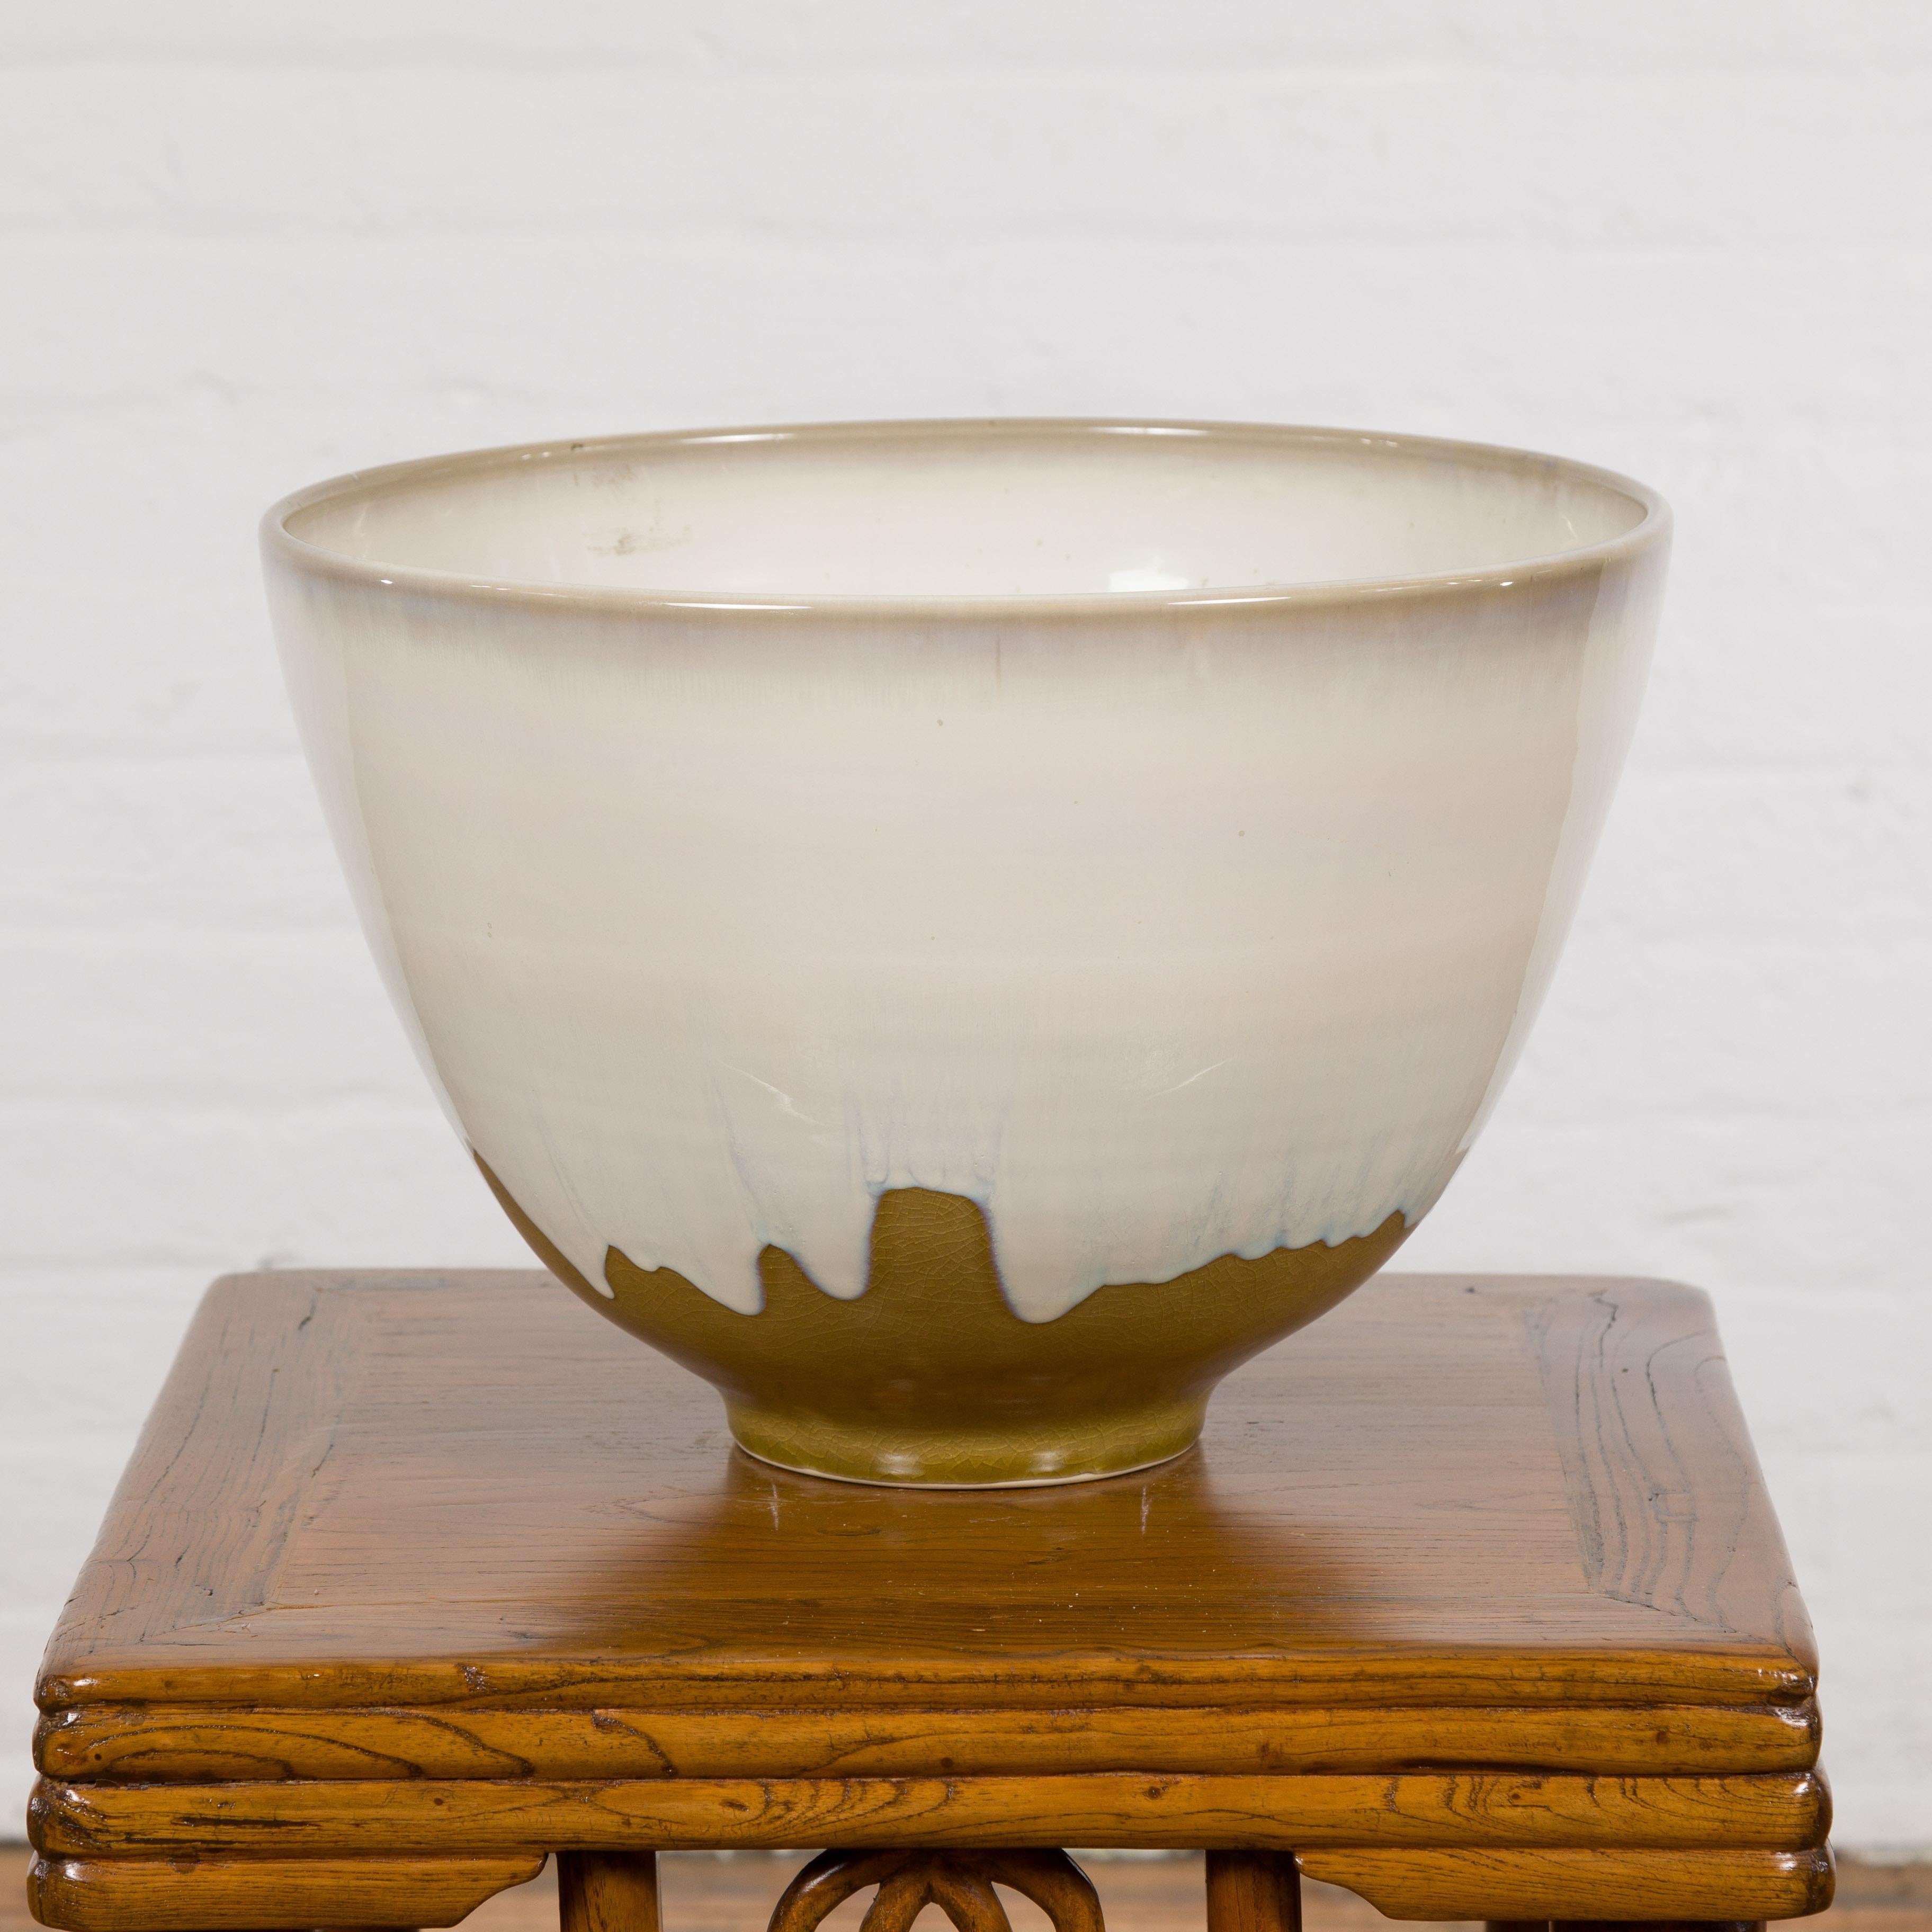 A Prem Collection Contemporary White & Brown Glazed Ceramic Bowl from the 21st century. Exuding elegance and modern sophistication, this 21st-century ceramic planter from the Prem Collection is an artisanal treasure that elevates indoor plant